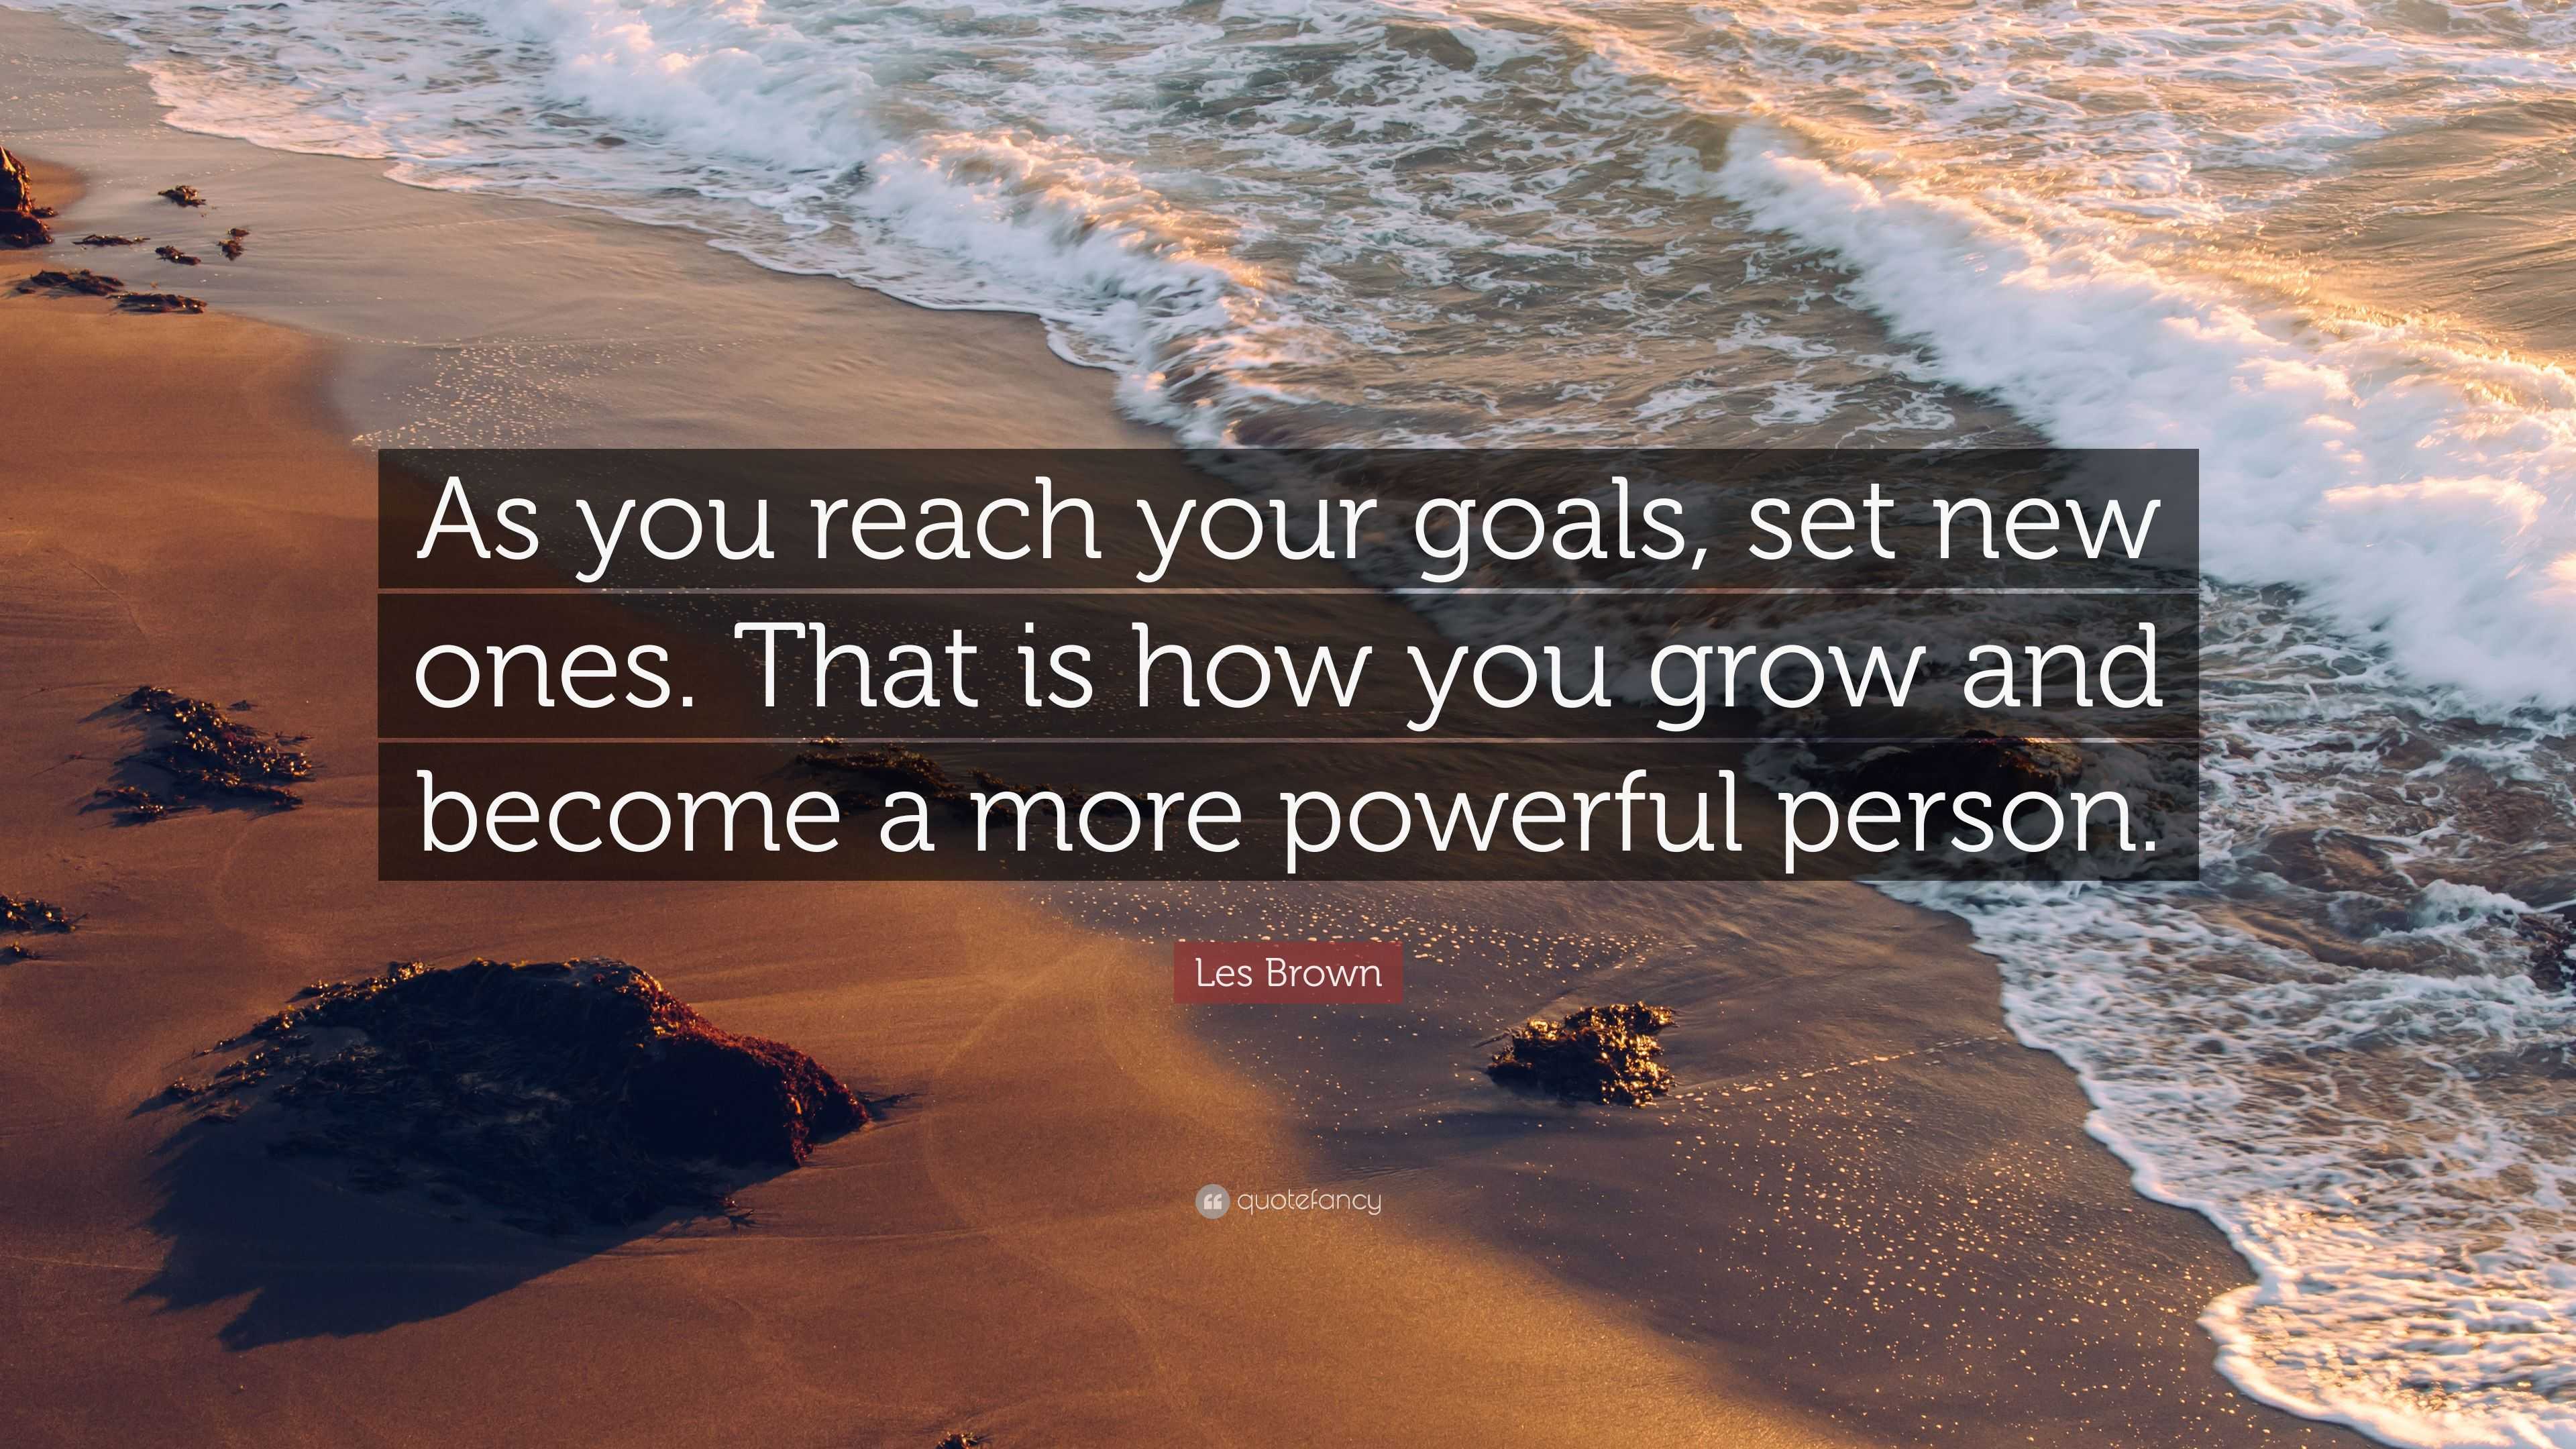 Les Brown Quote: “As you reach your goals, set new ones. That is how